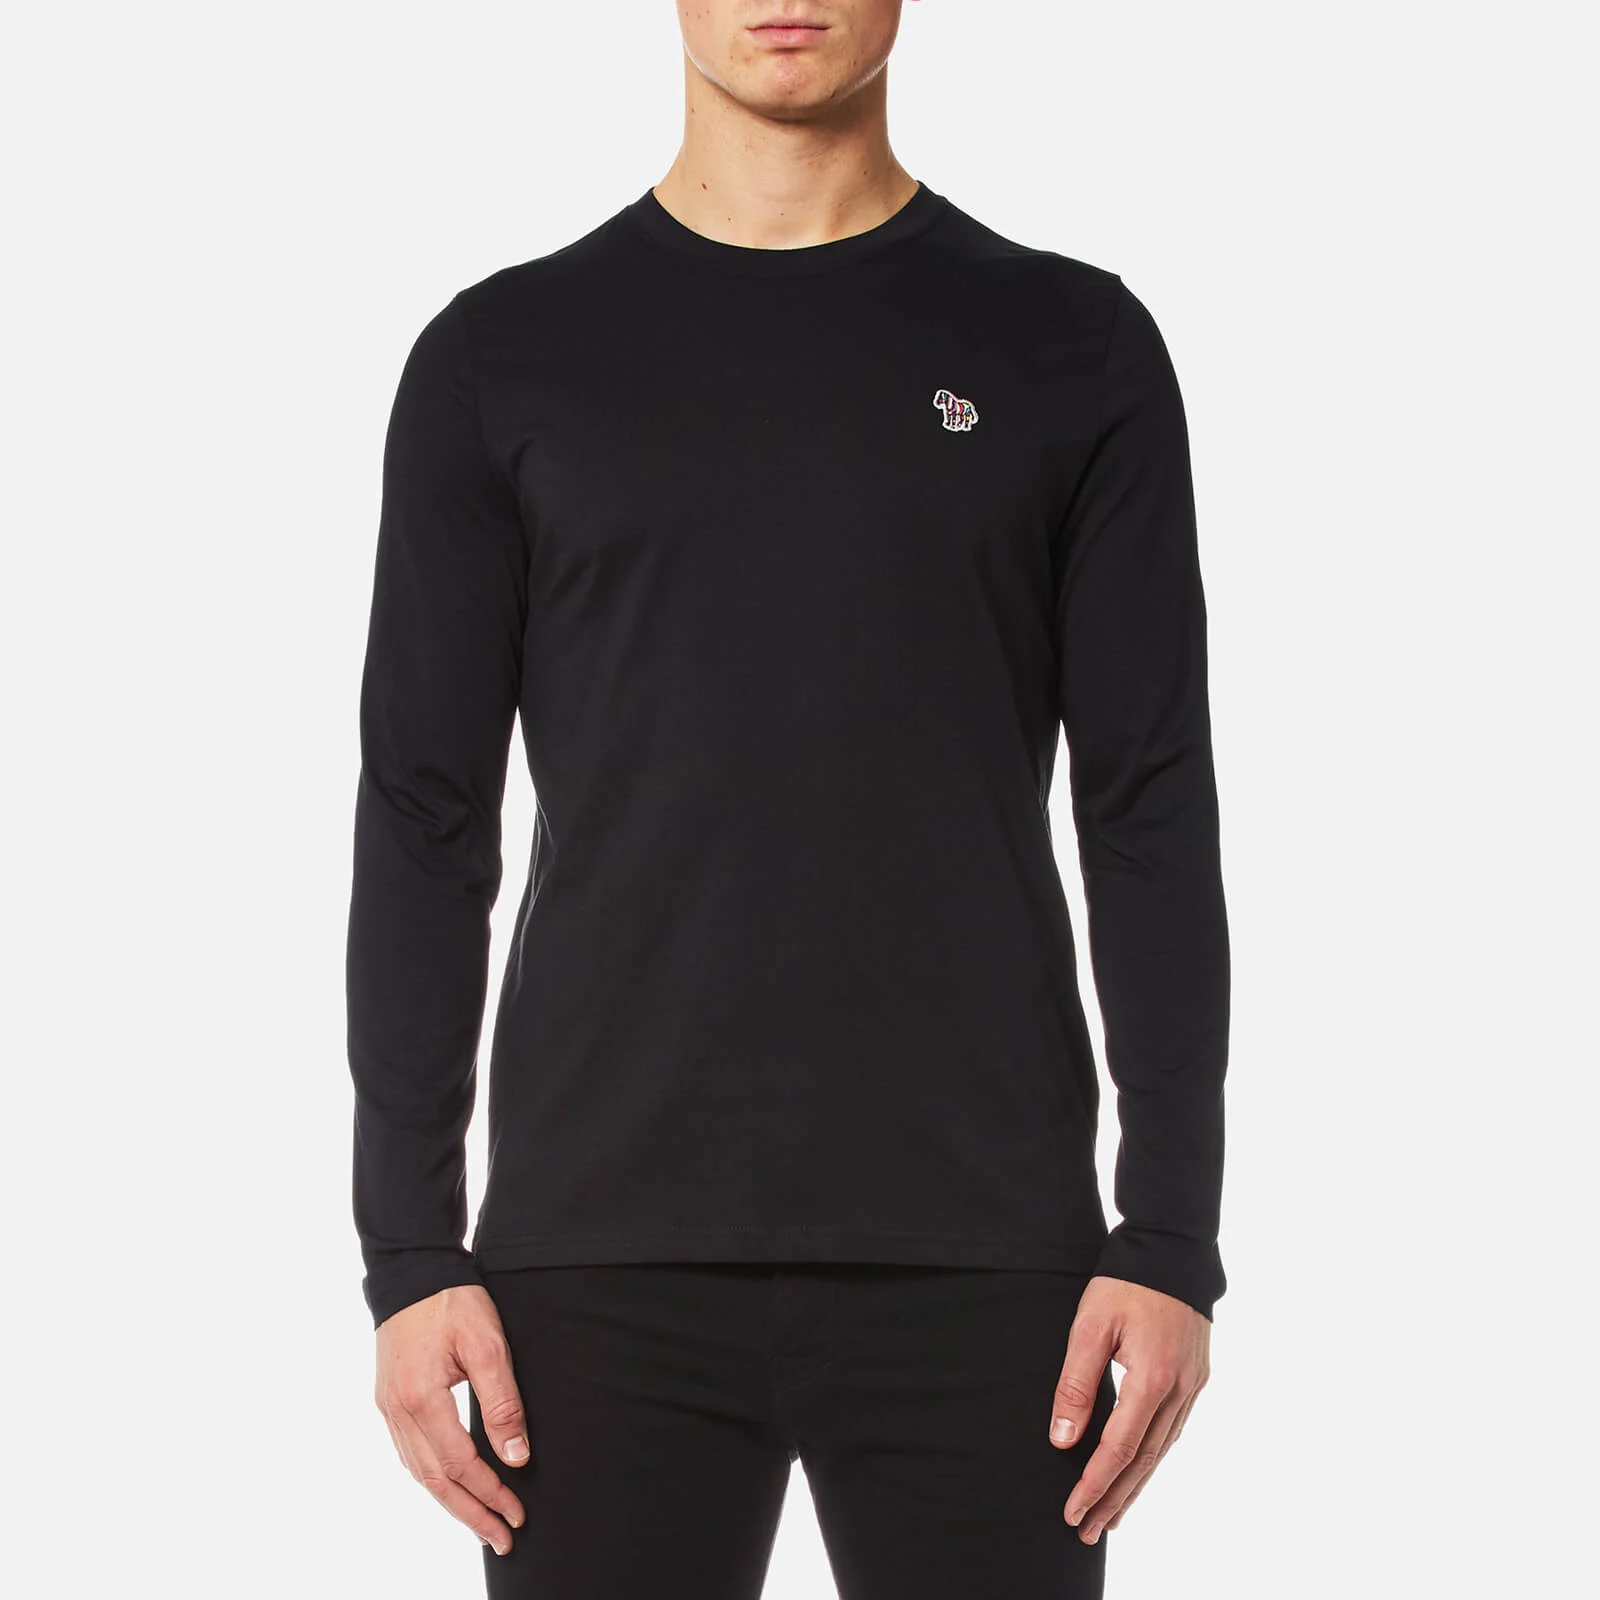 PS by Paul Smith Men's Long Sleeve T-Shirt - Black Image 1